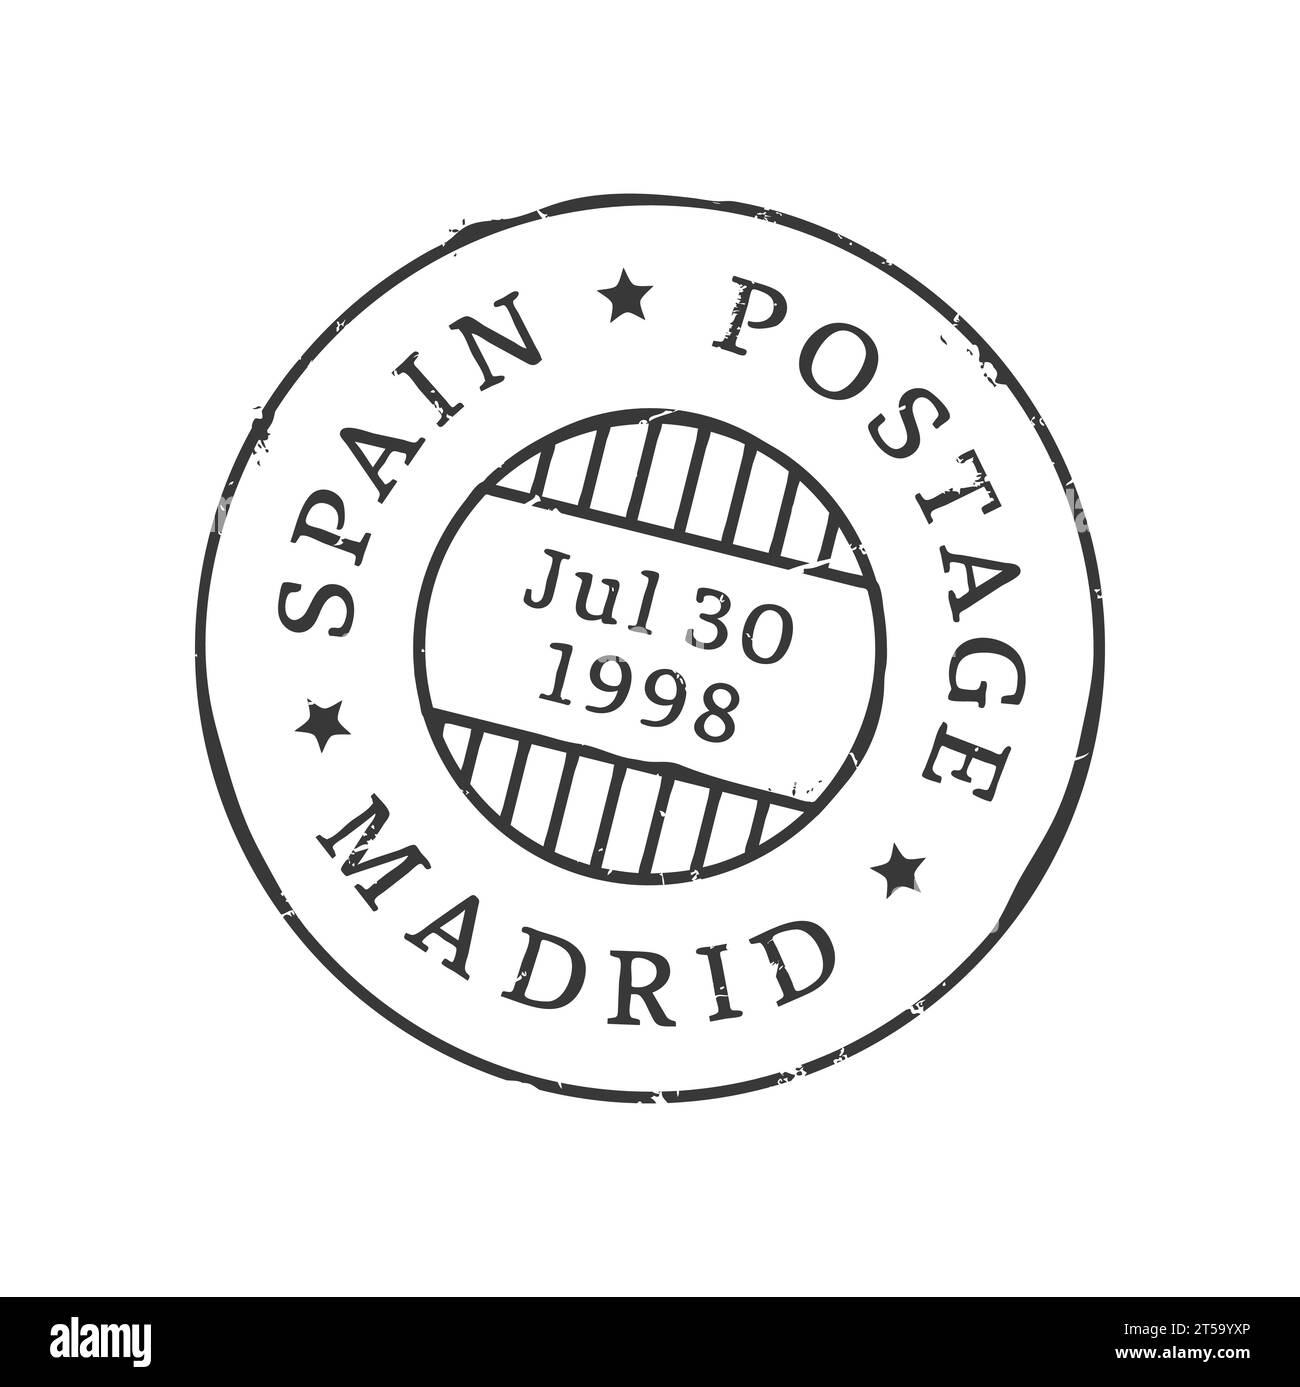 Madrid postage and postal stamp. Postcard, letter or parcel town postal seal, European country departure region or city aged vector imprint or mail delivery Spain Madrid postmark Stock Vector